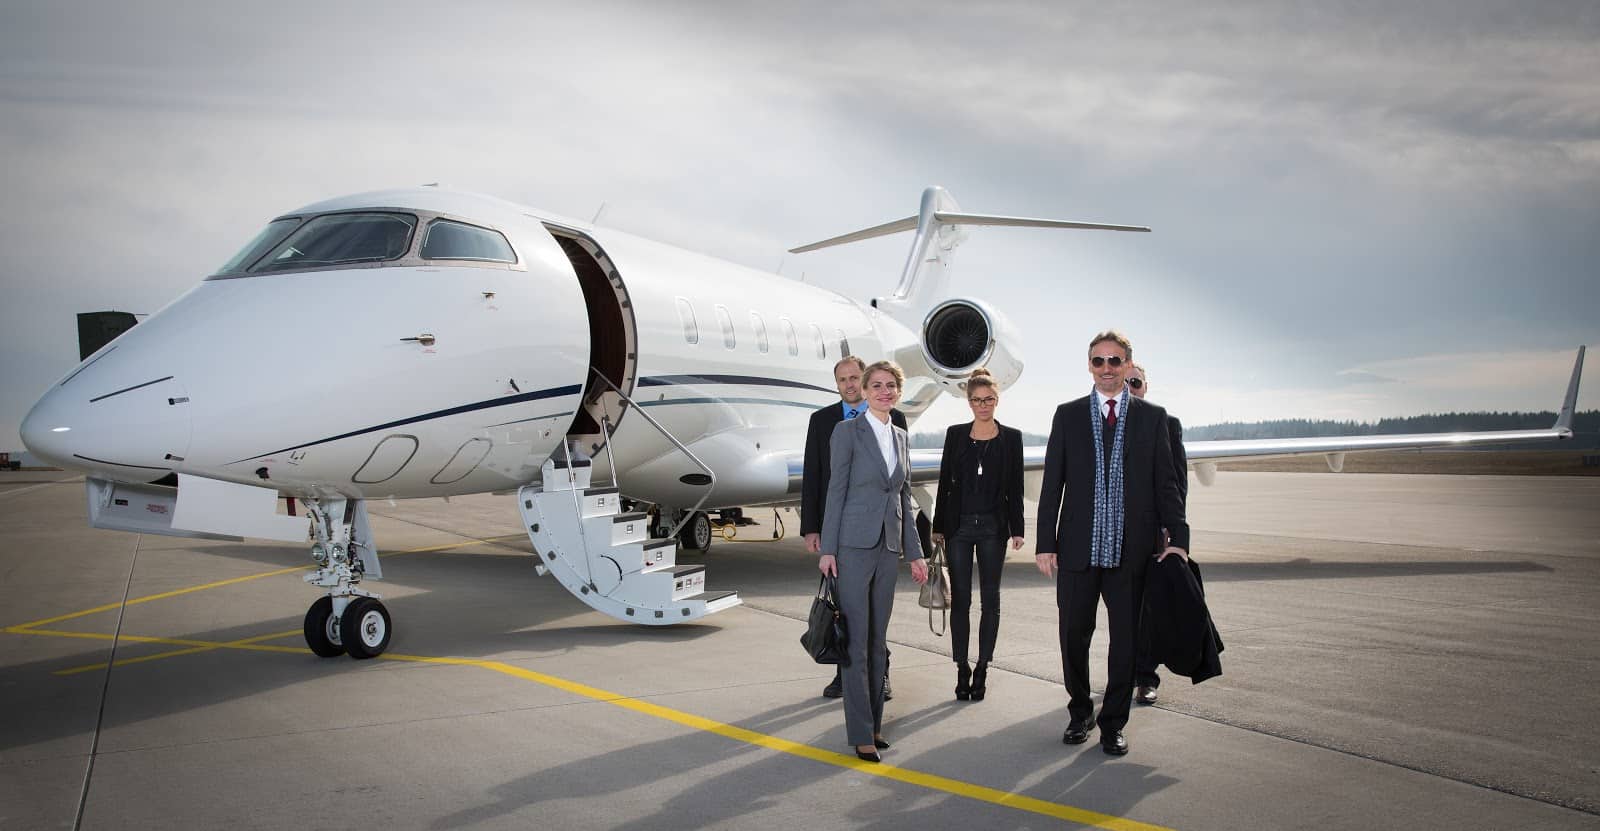 Empty leg flights: A private plane on the tarmac with business people standing in front of it